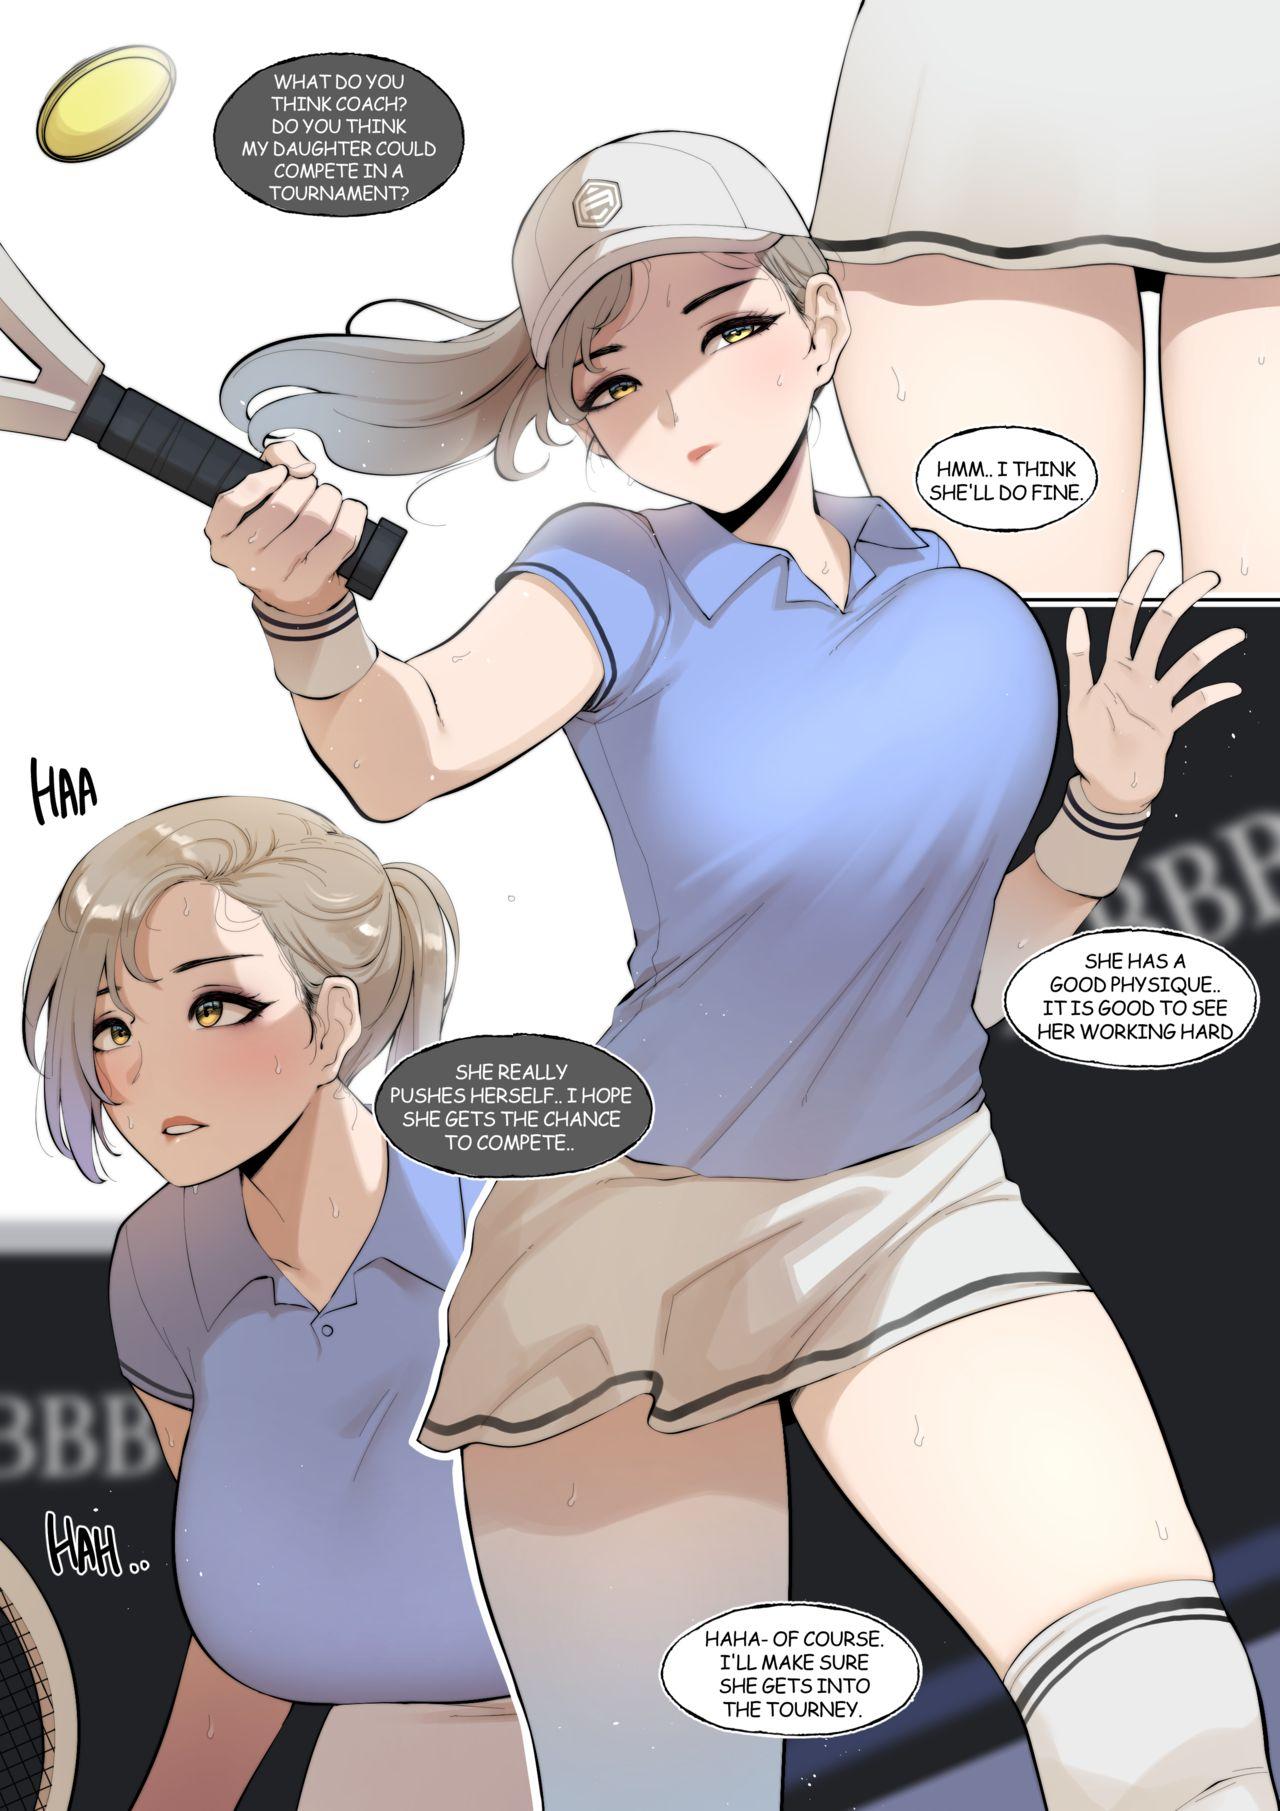 Asstomouth It's Normal for us to Have Sex if You Lose Right? Tennis edition - Original Dykes - Page 2